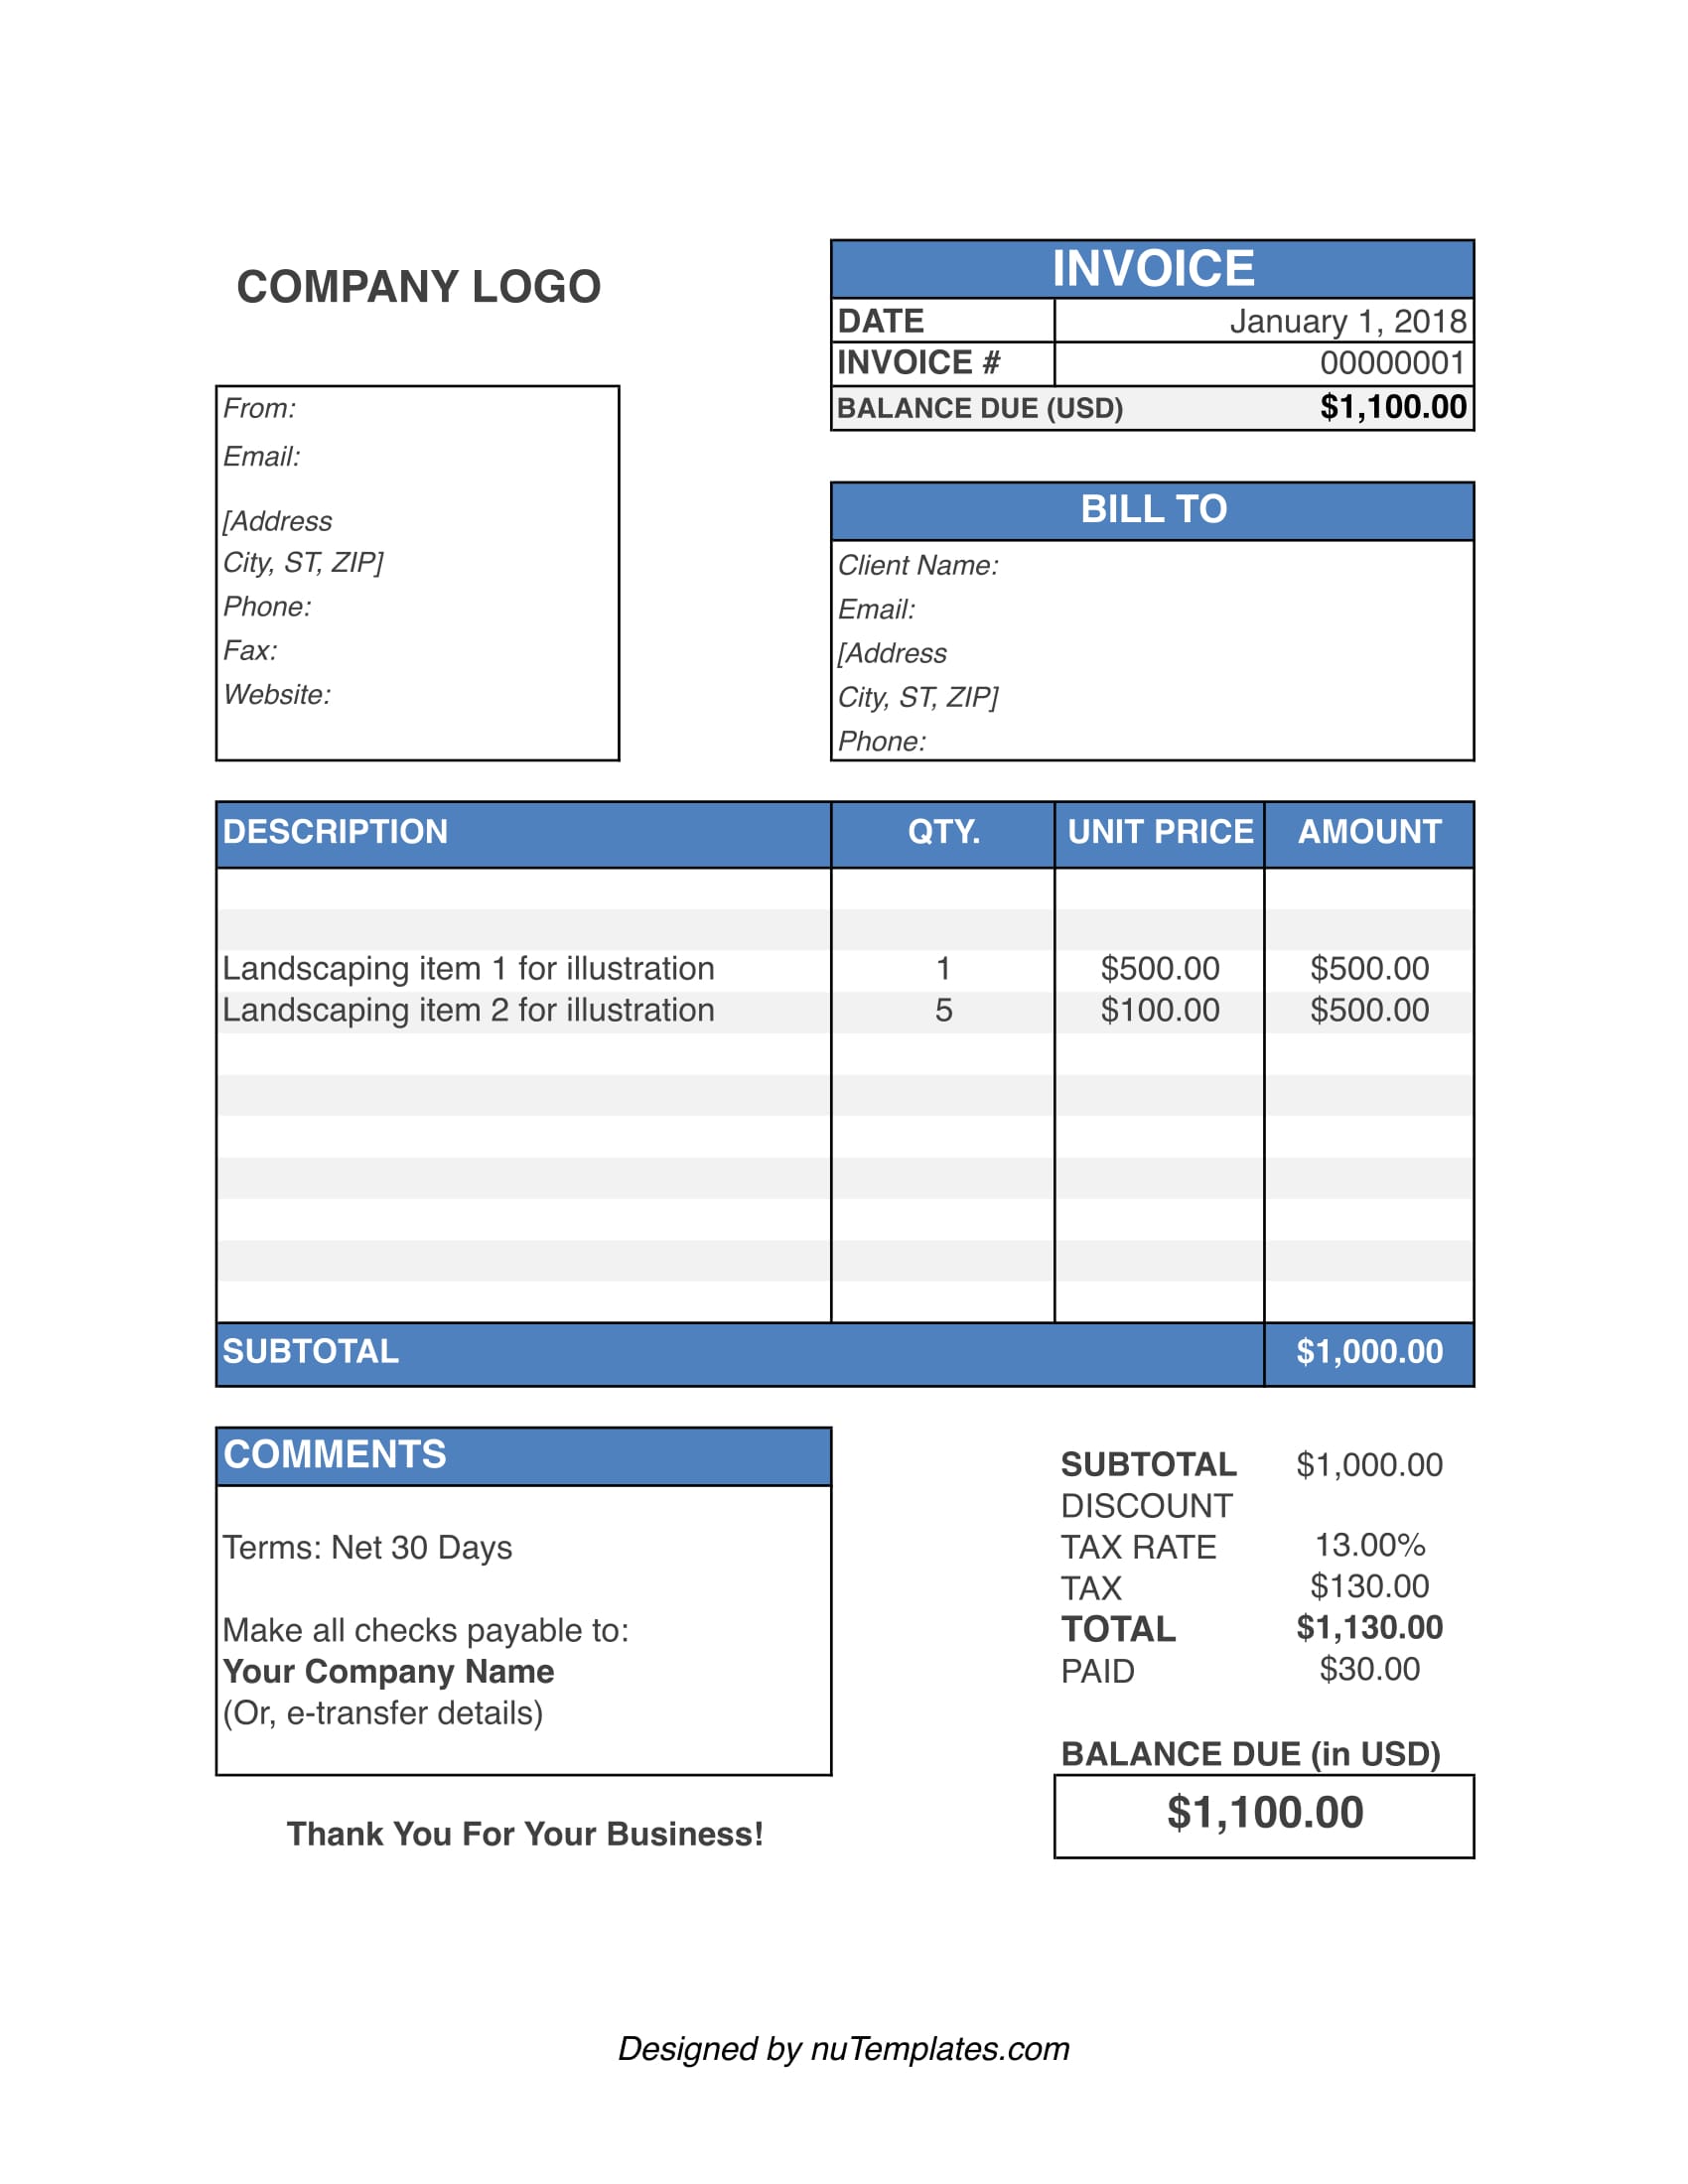 Landscaping Invoice Template Landscaping Invoices nuTemplates